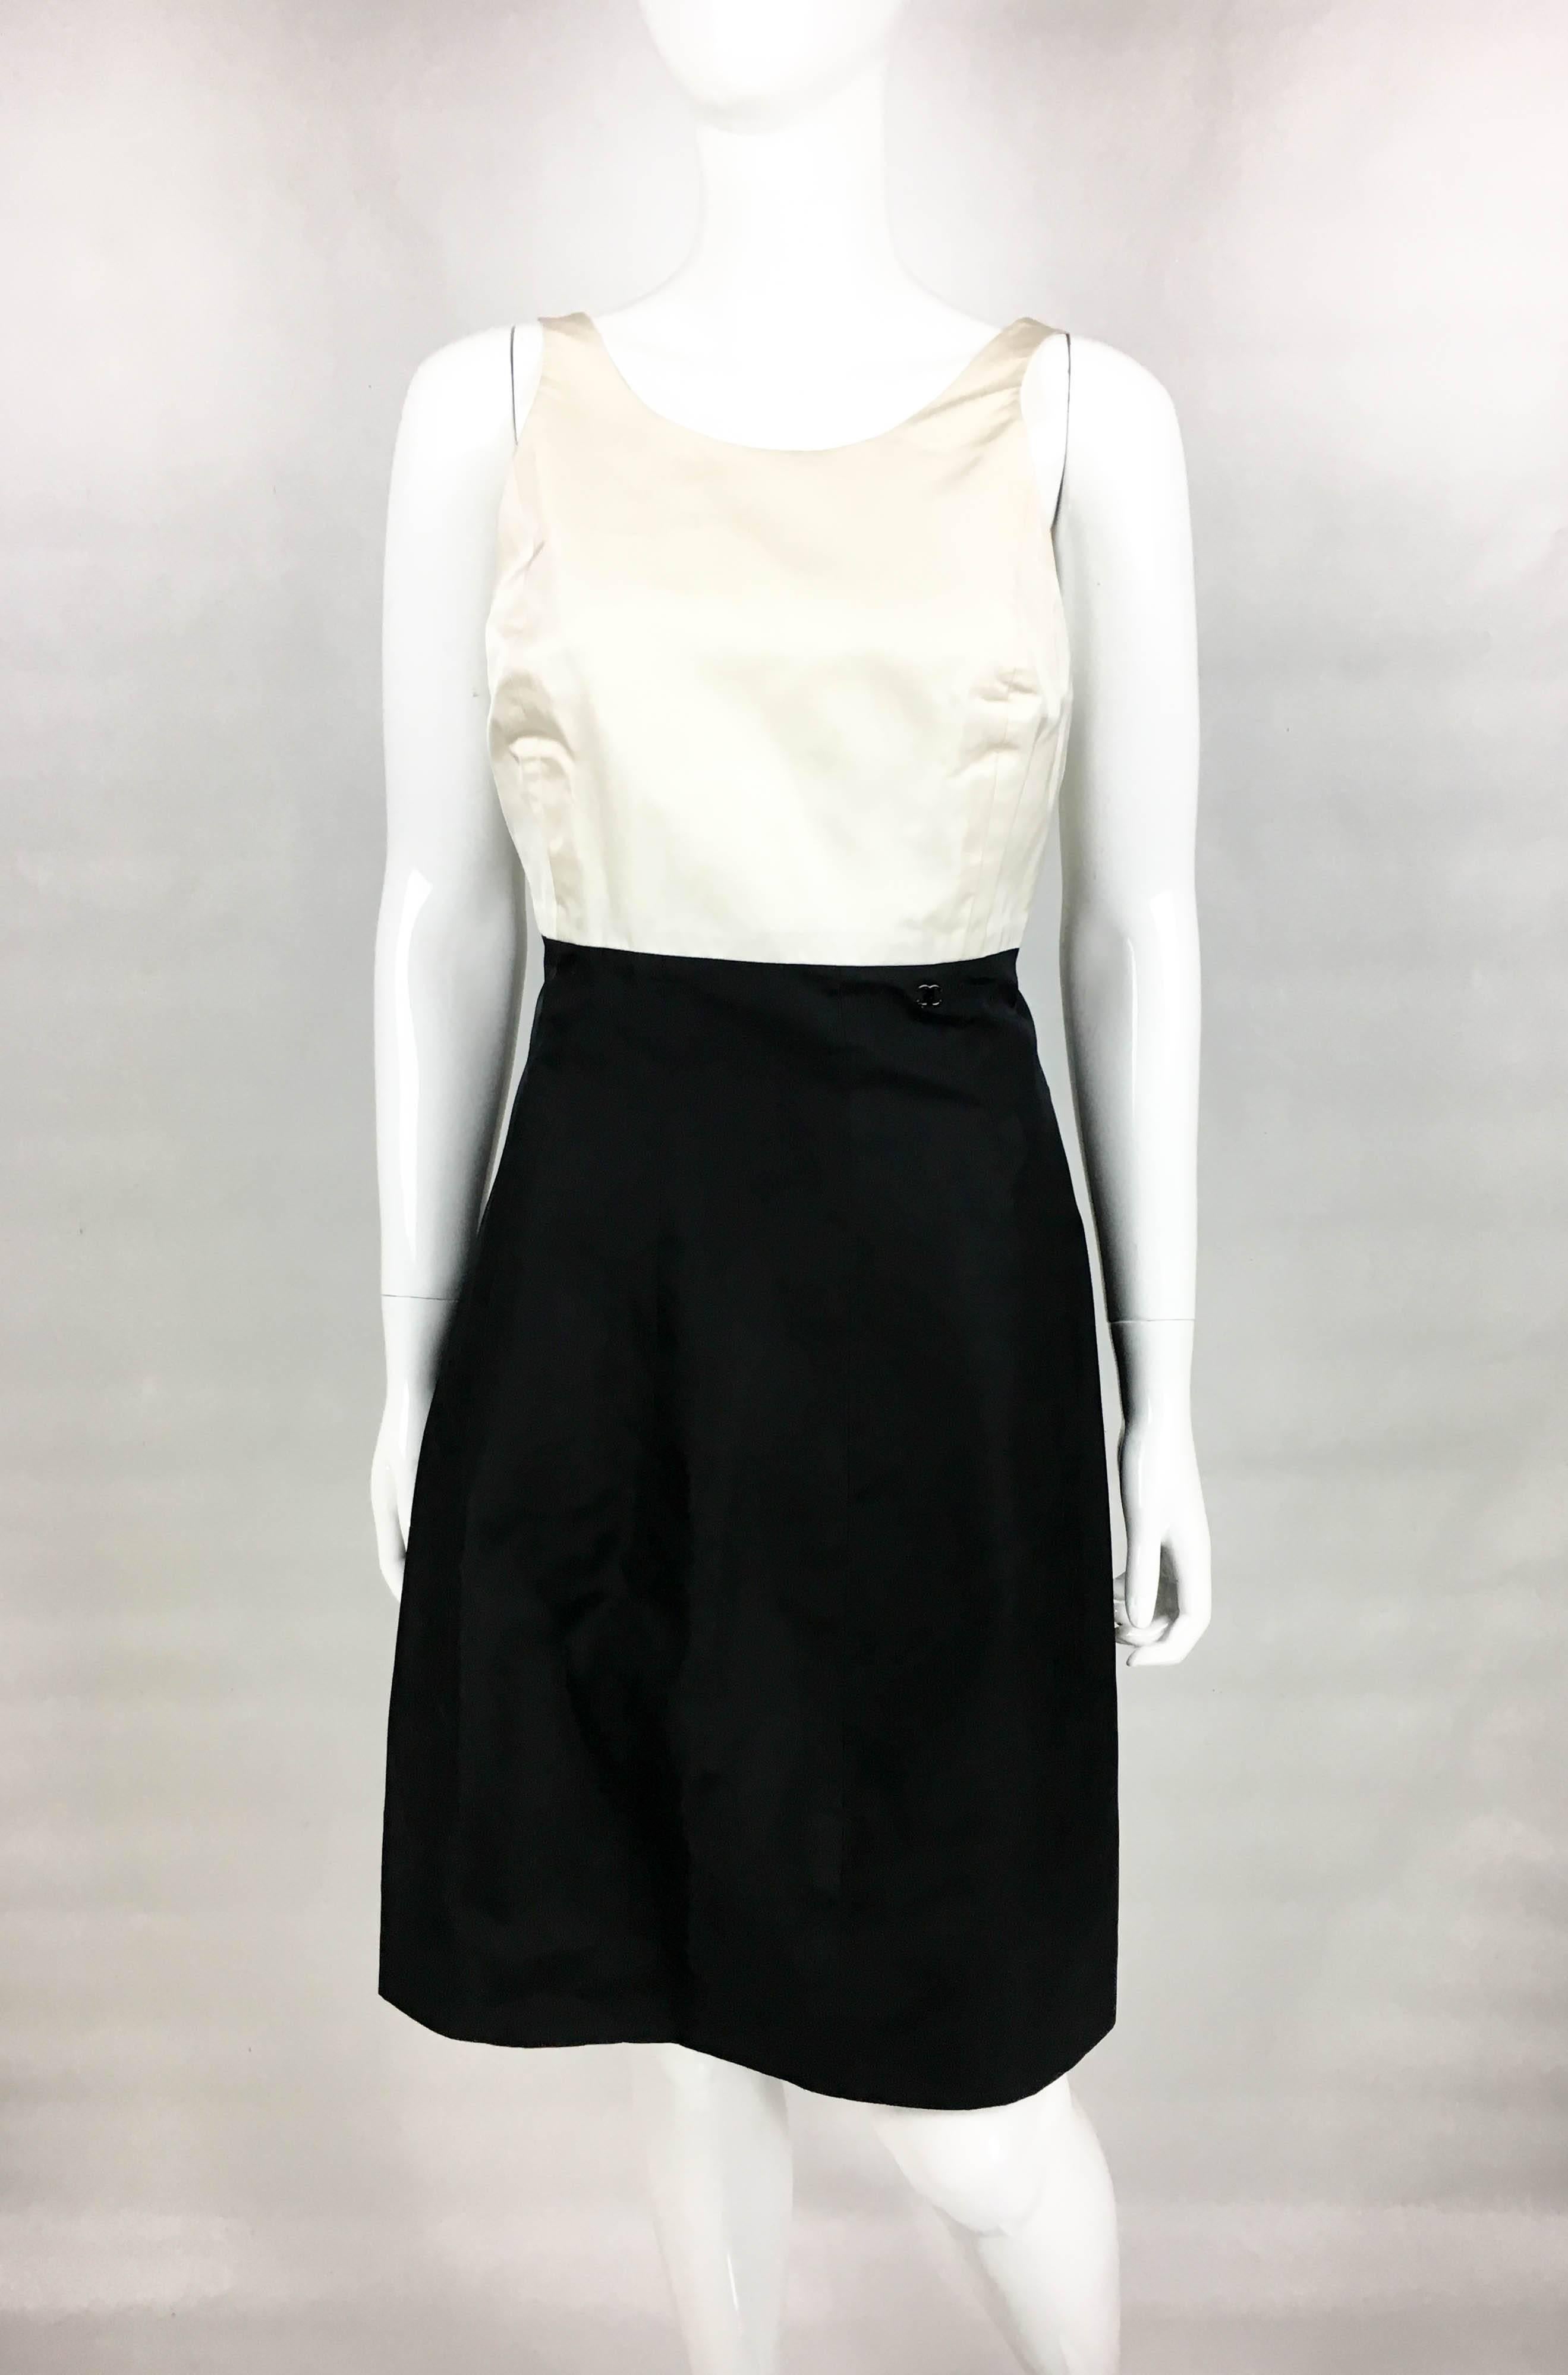 2006 Chanel Black and White Silk Cocktail Dress In Excellent Condition For Sale In London, Chelsea